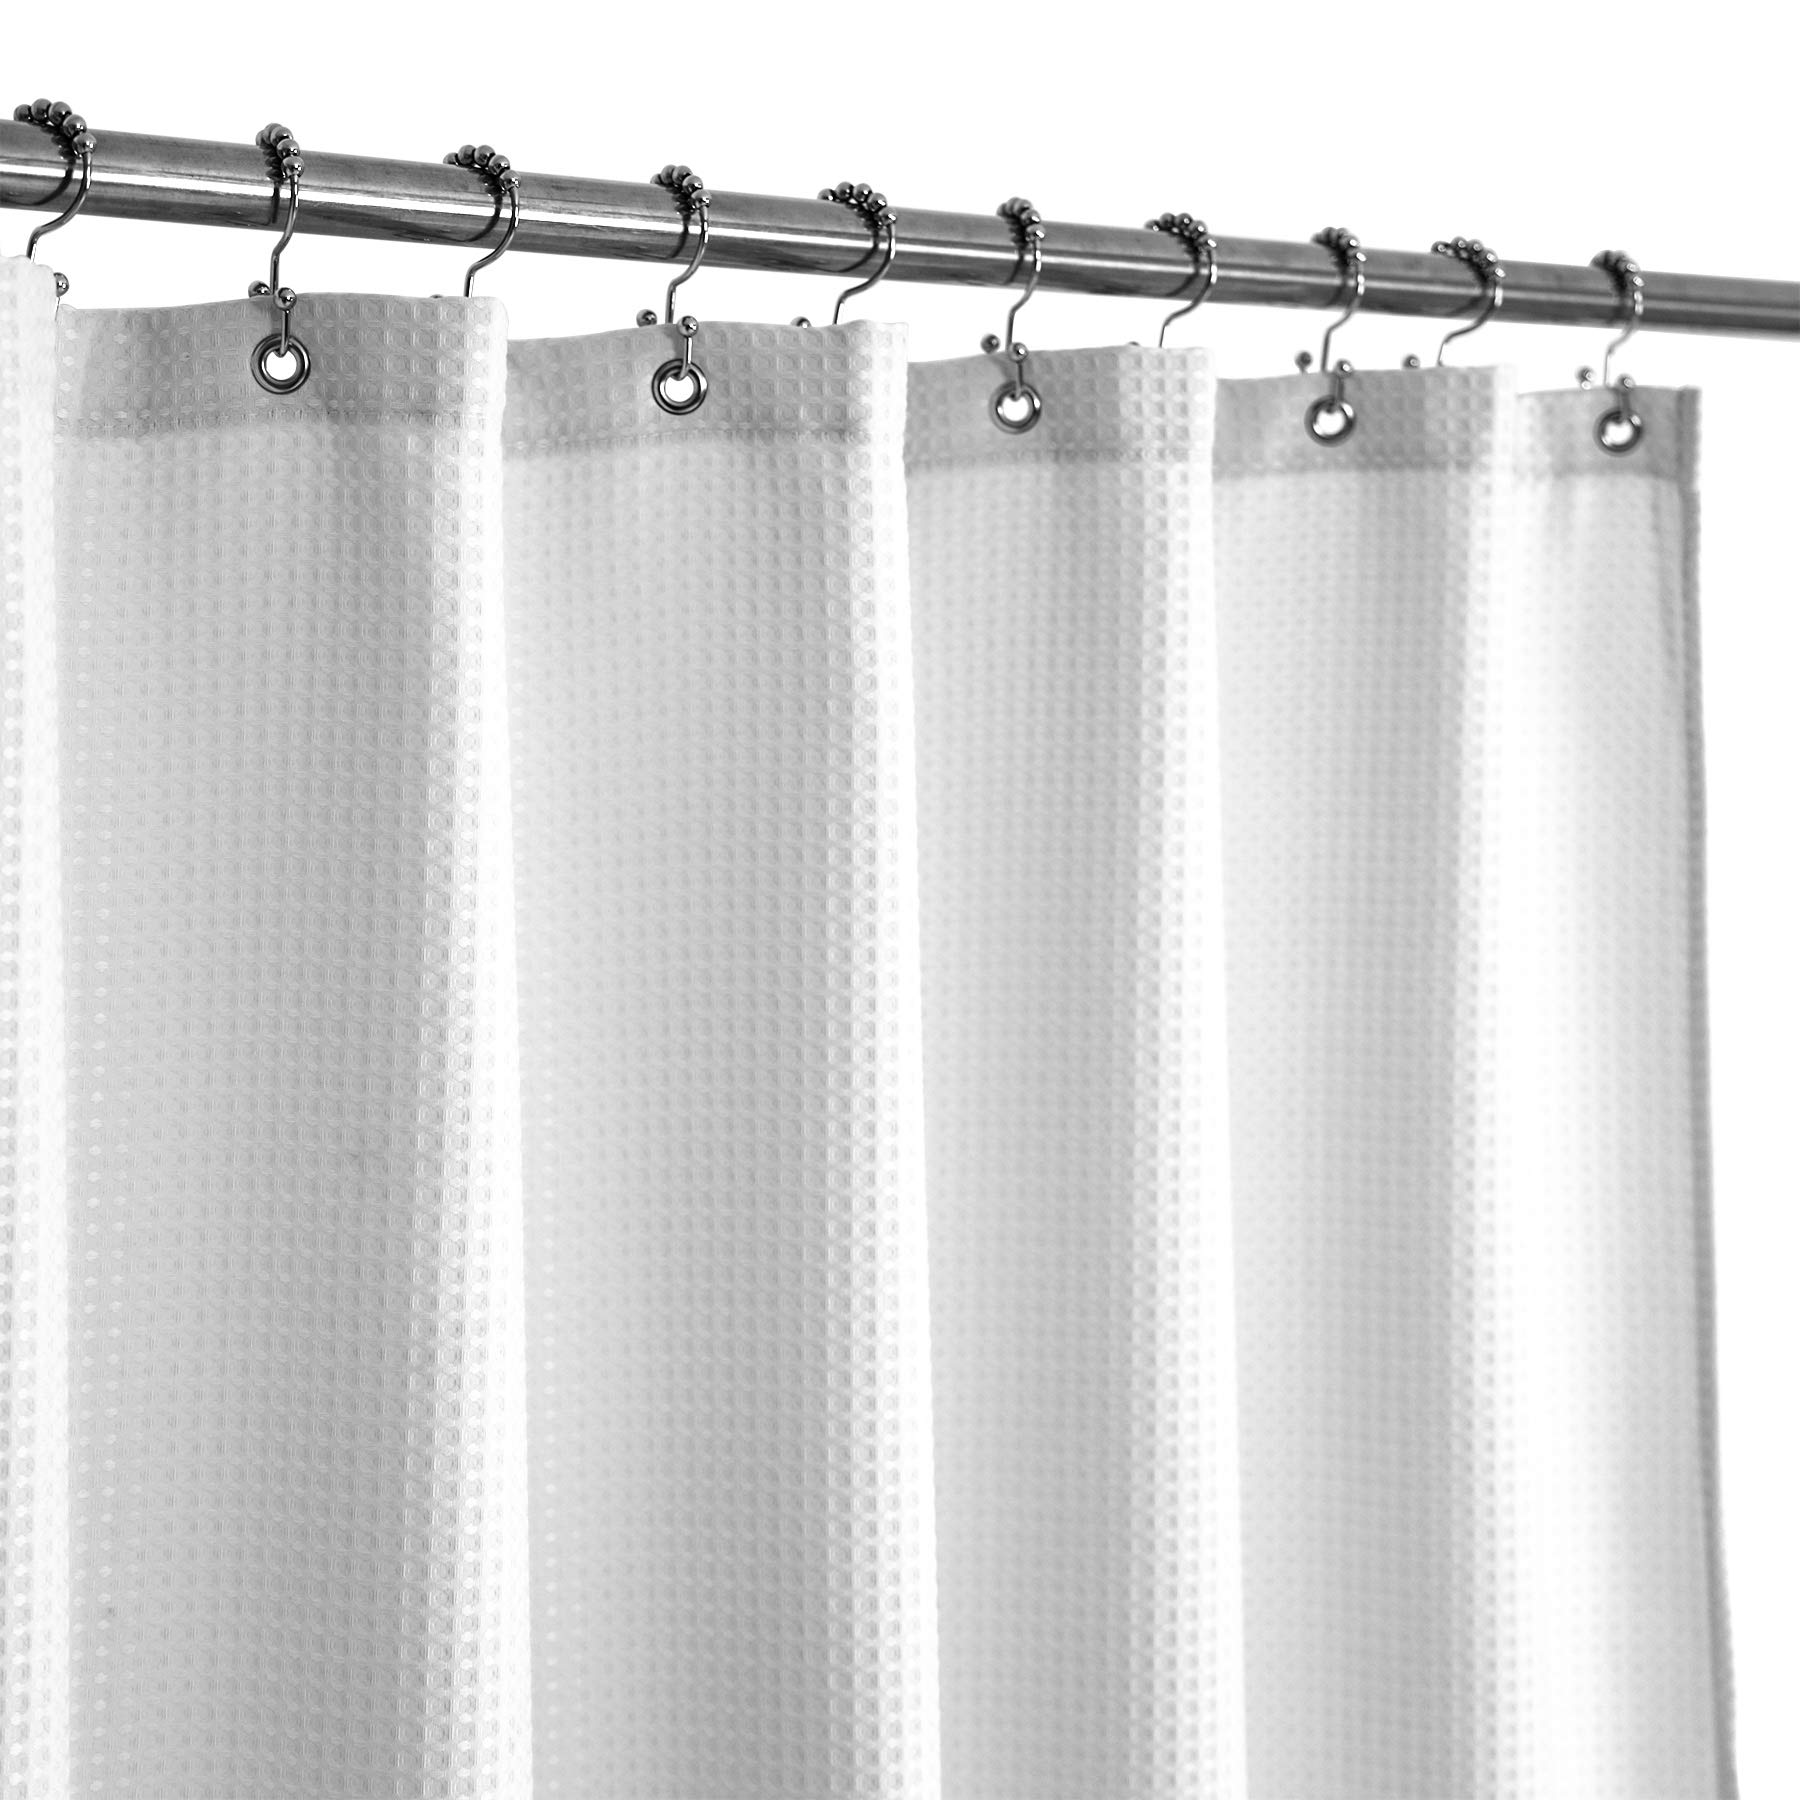 Book Cover Wide Fabric Shower Curtain Waffle Weave 96 Width by 72 Height inches, Hotel Luxury Spa, 230 GSM Heavyweight, Water Repellent, Machine Washable, White Pique Pattern Bathroom Curtain, 96x72 White 96Wx72L